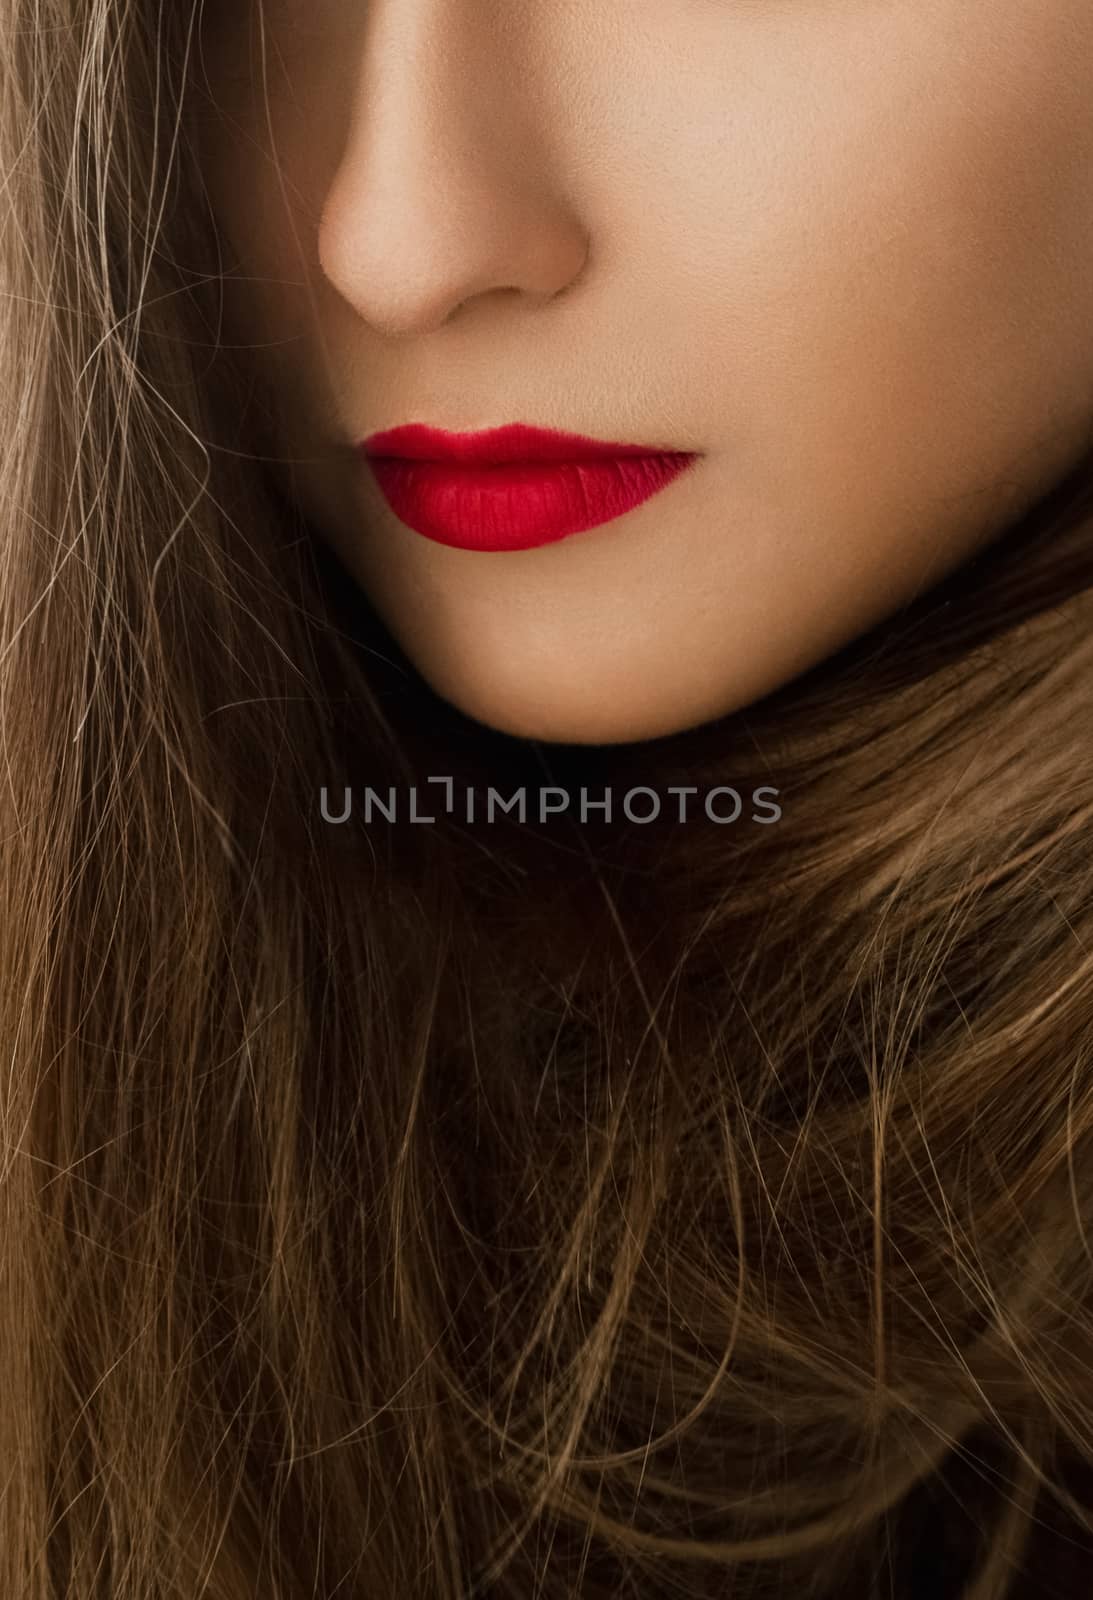 Glamorous beauty face closeup of a woman with classy makeup look and bright lipstick, brunette girl with long hair, female model posing, luxury cosmetics or luxe skincare brand by Anneleven